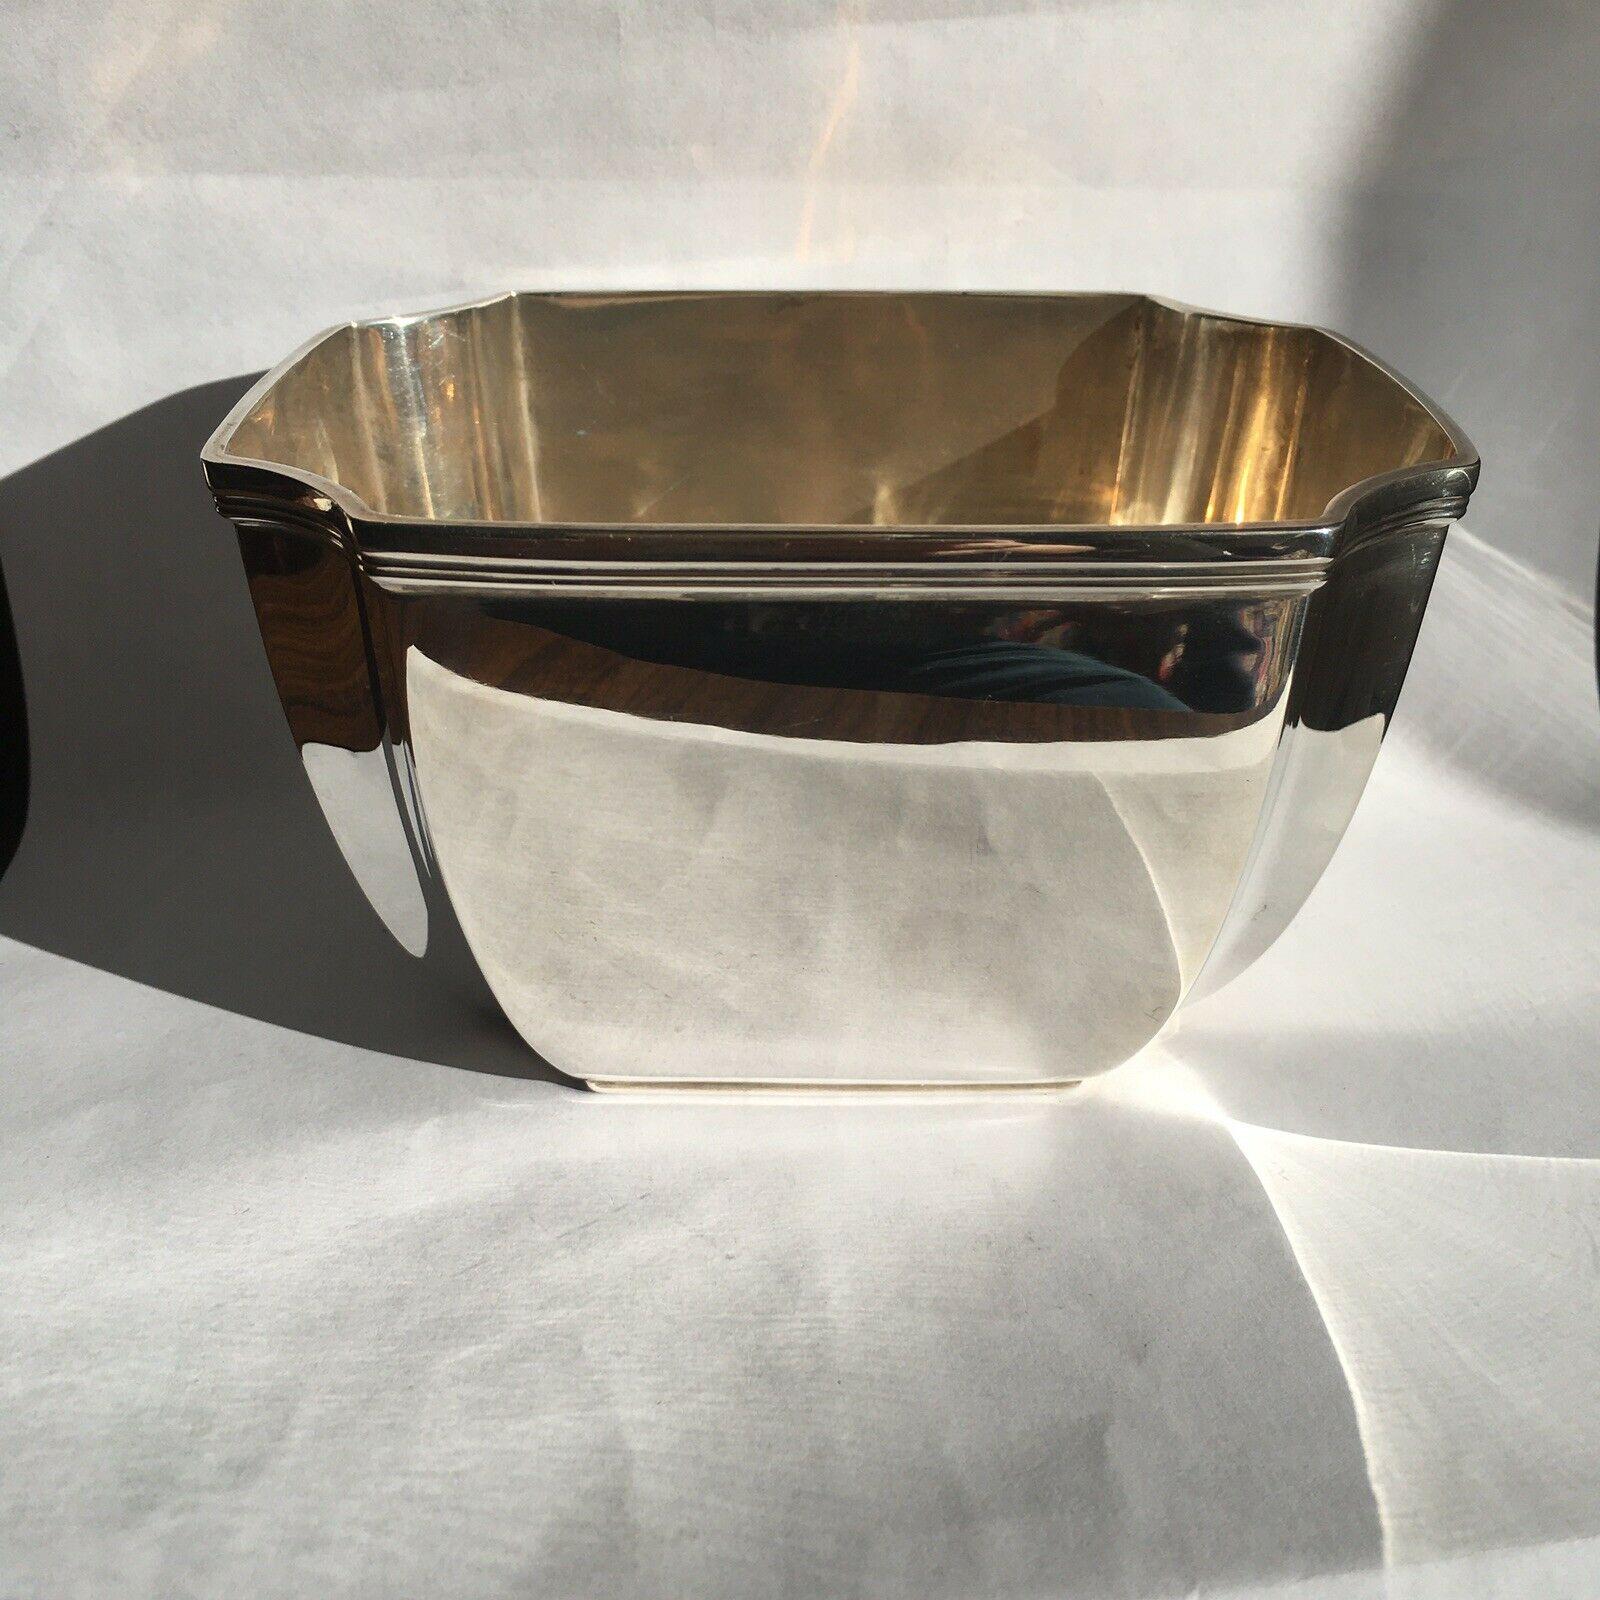 Tiffany Hampton Bowl, 18389, American Sterling Silver + Forks & Spoons In Good Condition For Sale In Santa Monica, CA